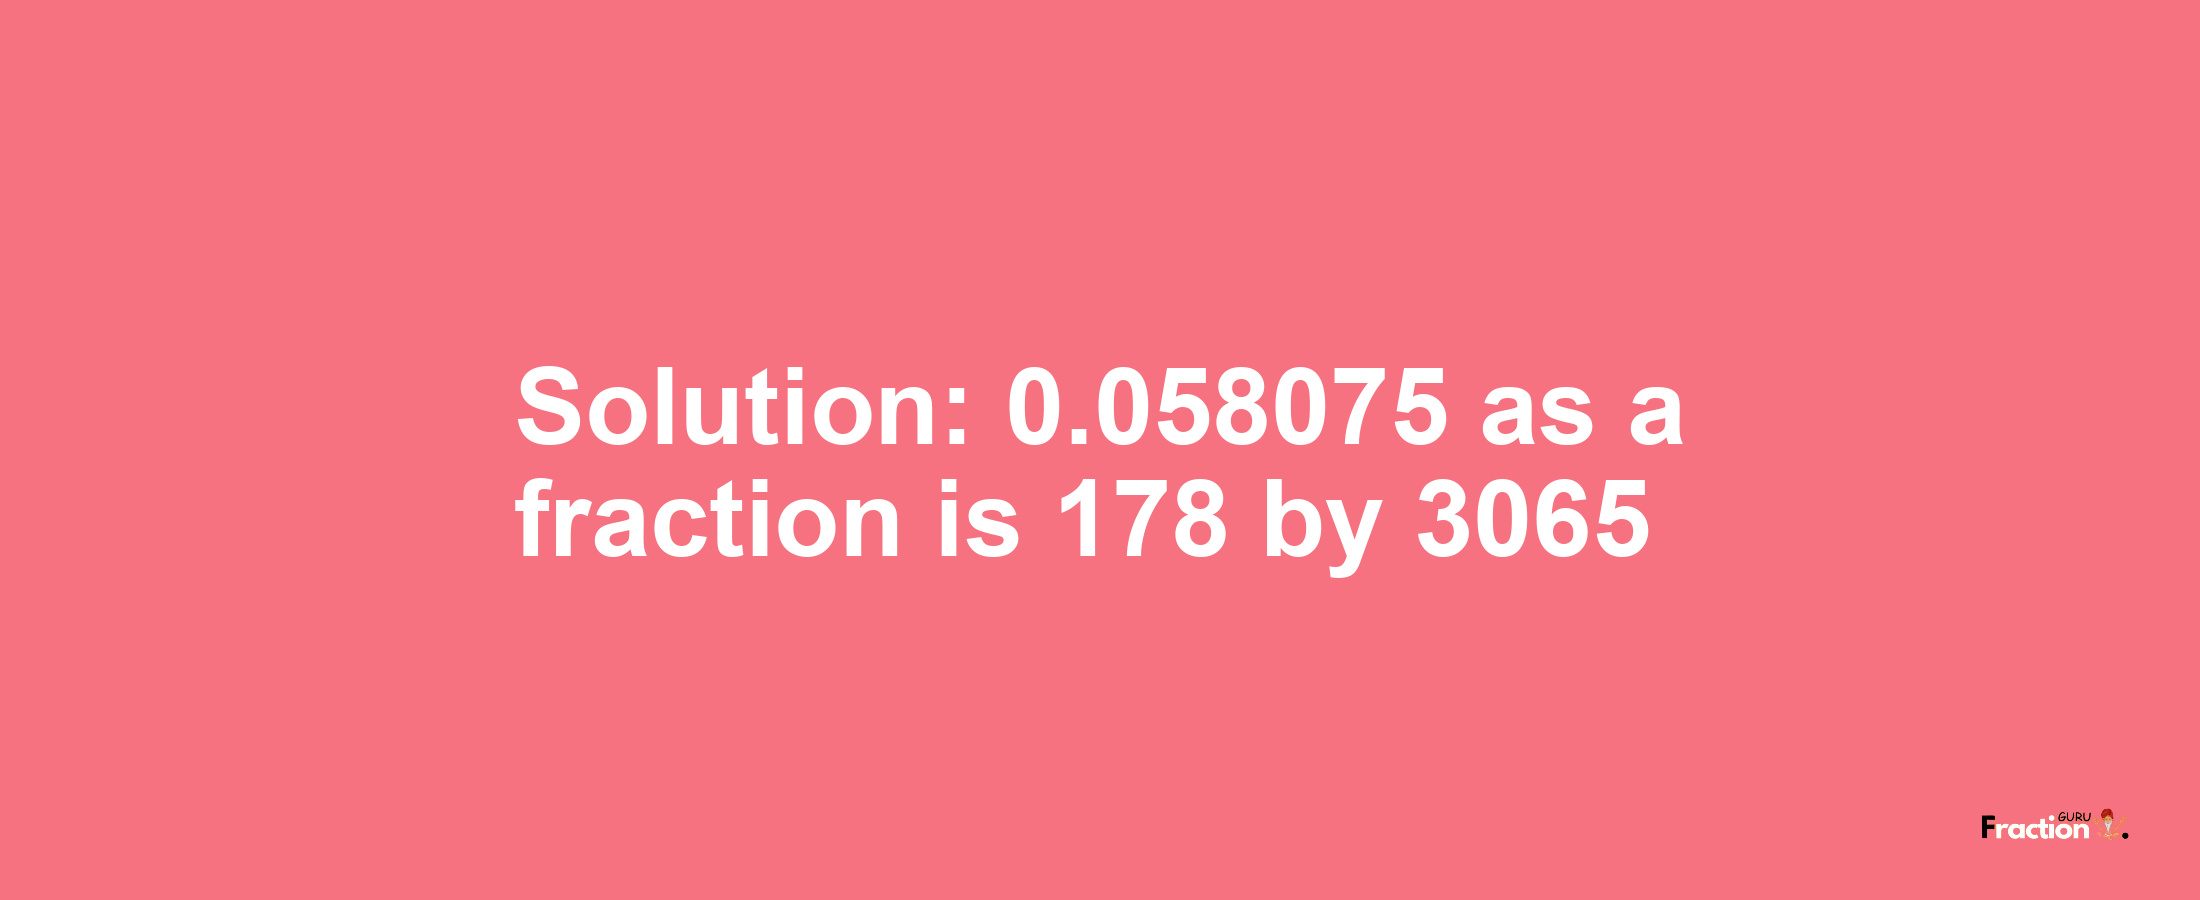 Solution:0.058075 as a fraction is 178/3065